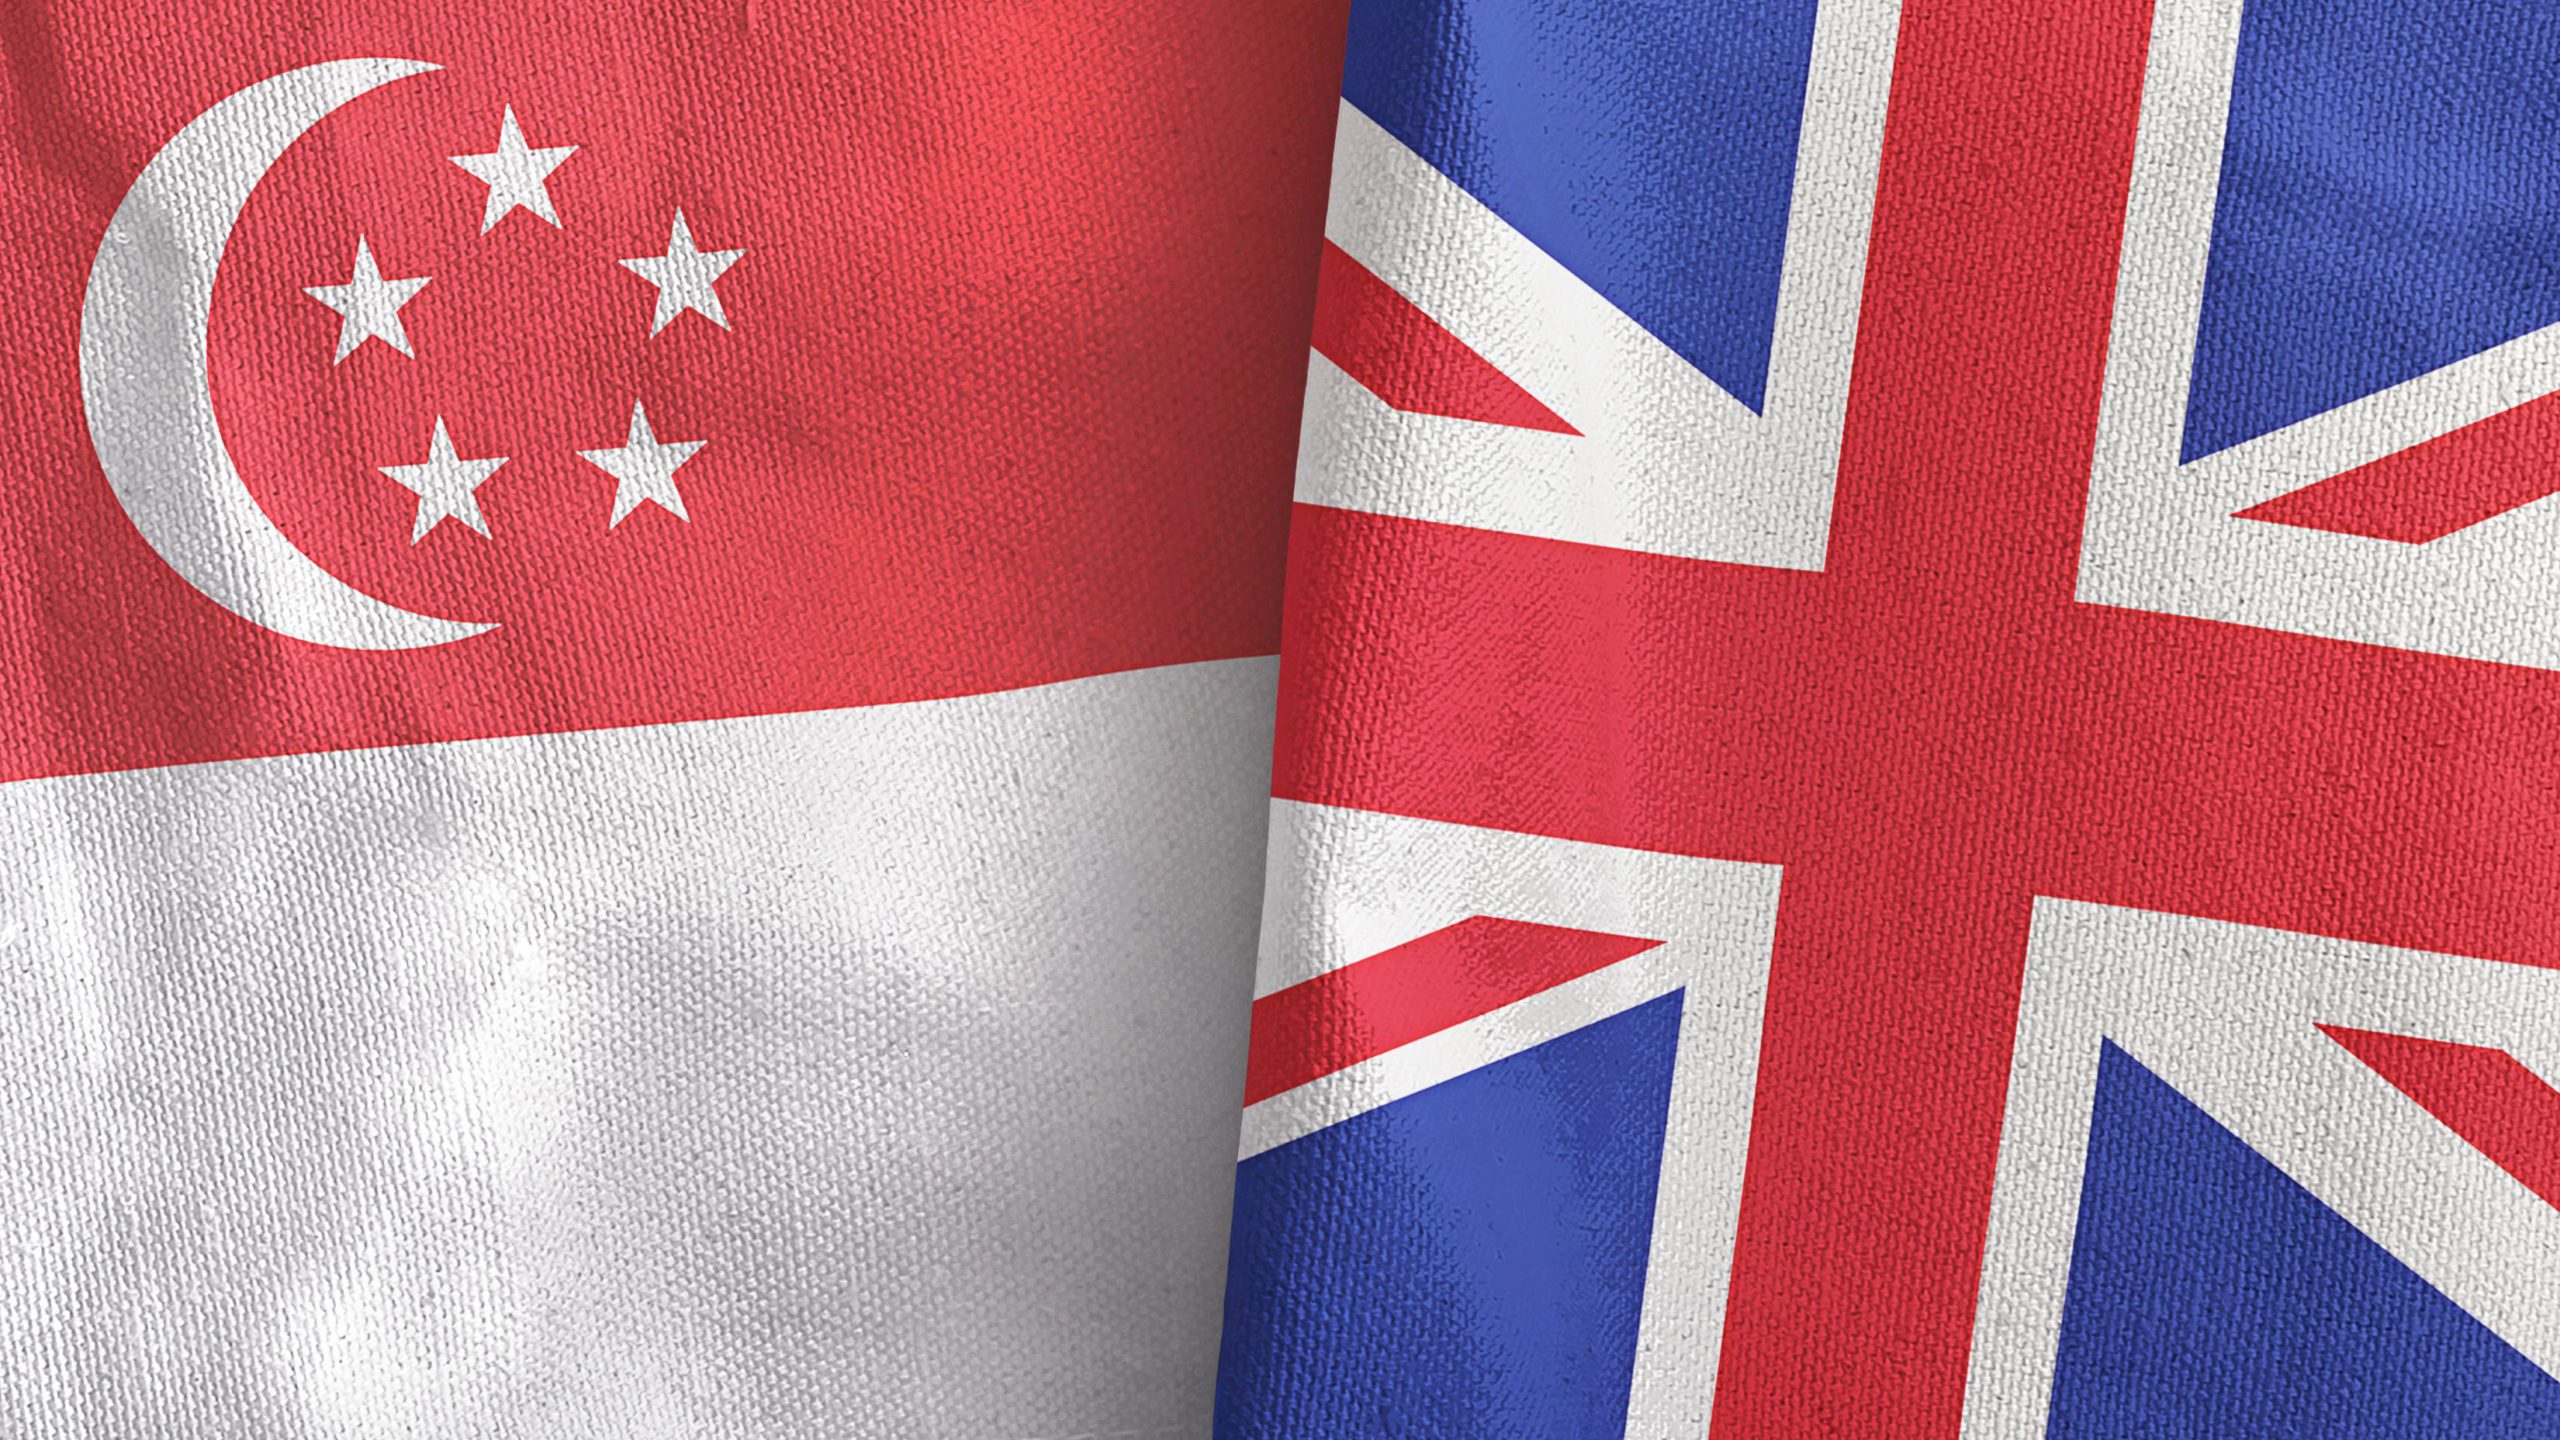 Singaporean and UK flags